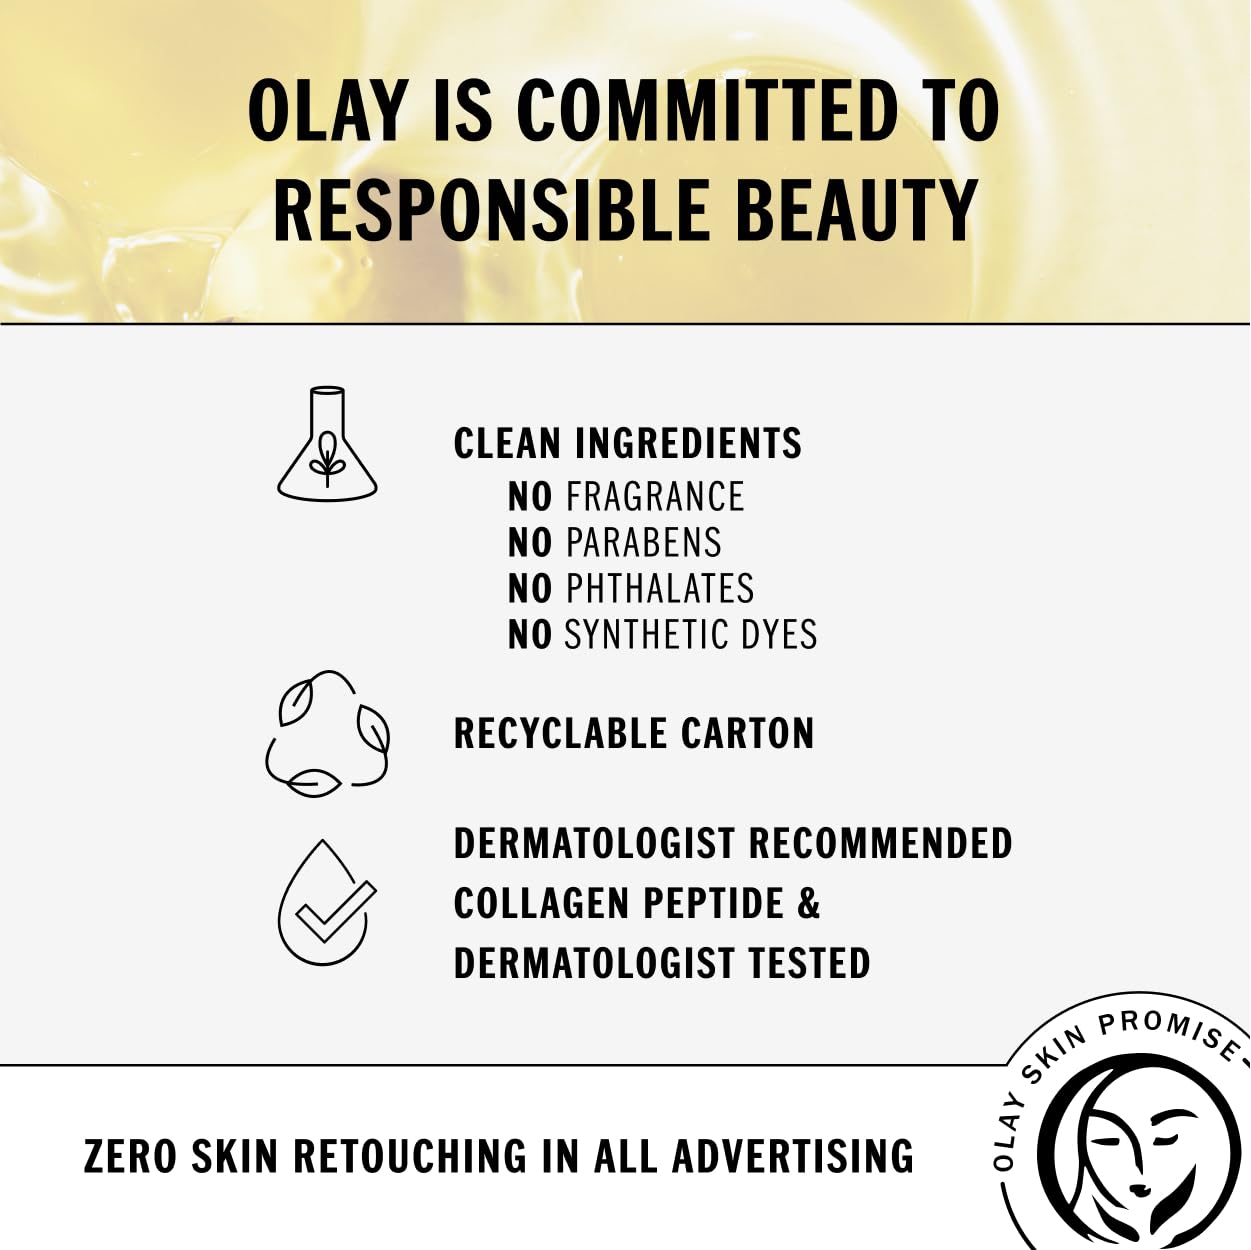 Olay Regenerist Collagen Peptide 24 Face Moisturizer Cream with Niacinamide for Firmer Skin, Anti-Wrinkle Fragrance-Free 1.7 oz, Includes Olay Whip Travel Size for Dry Skin